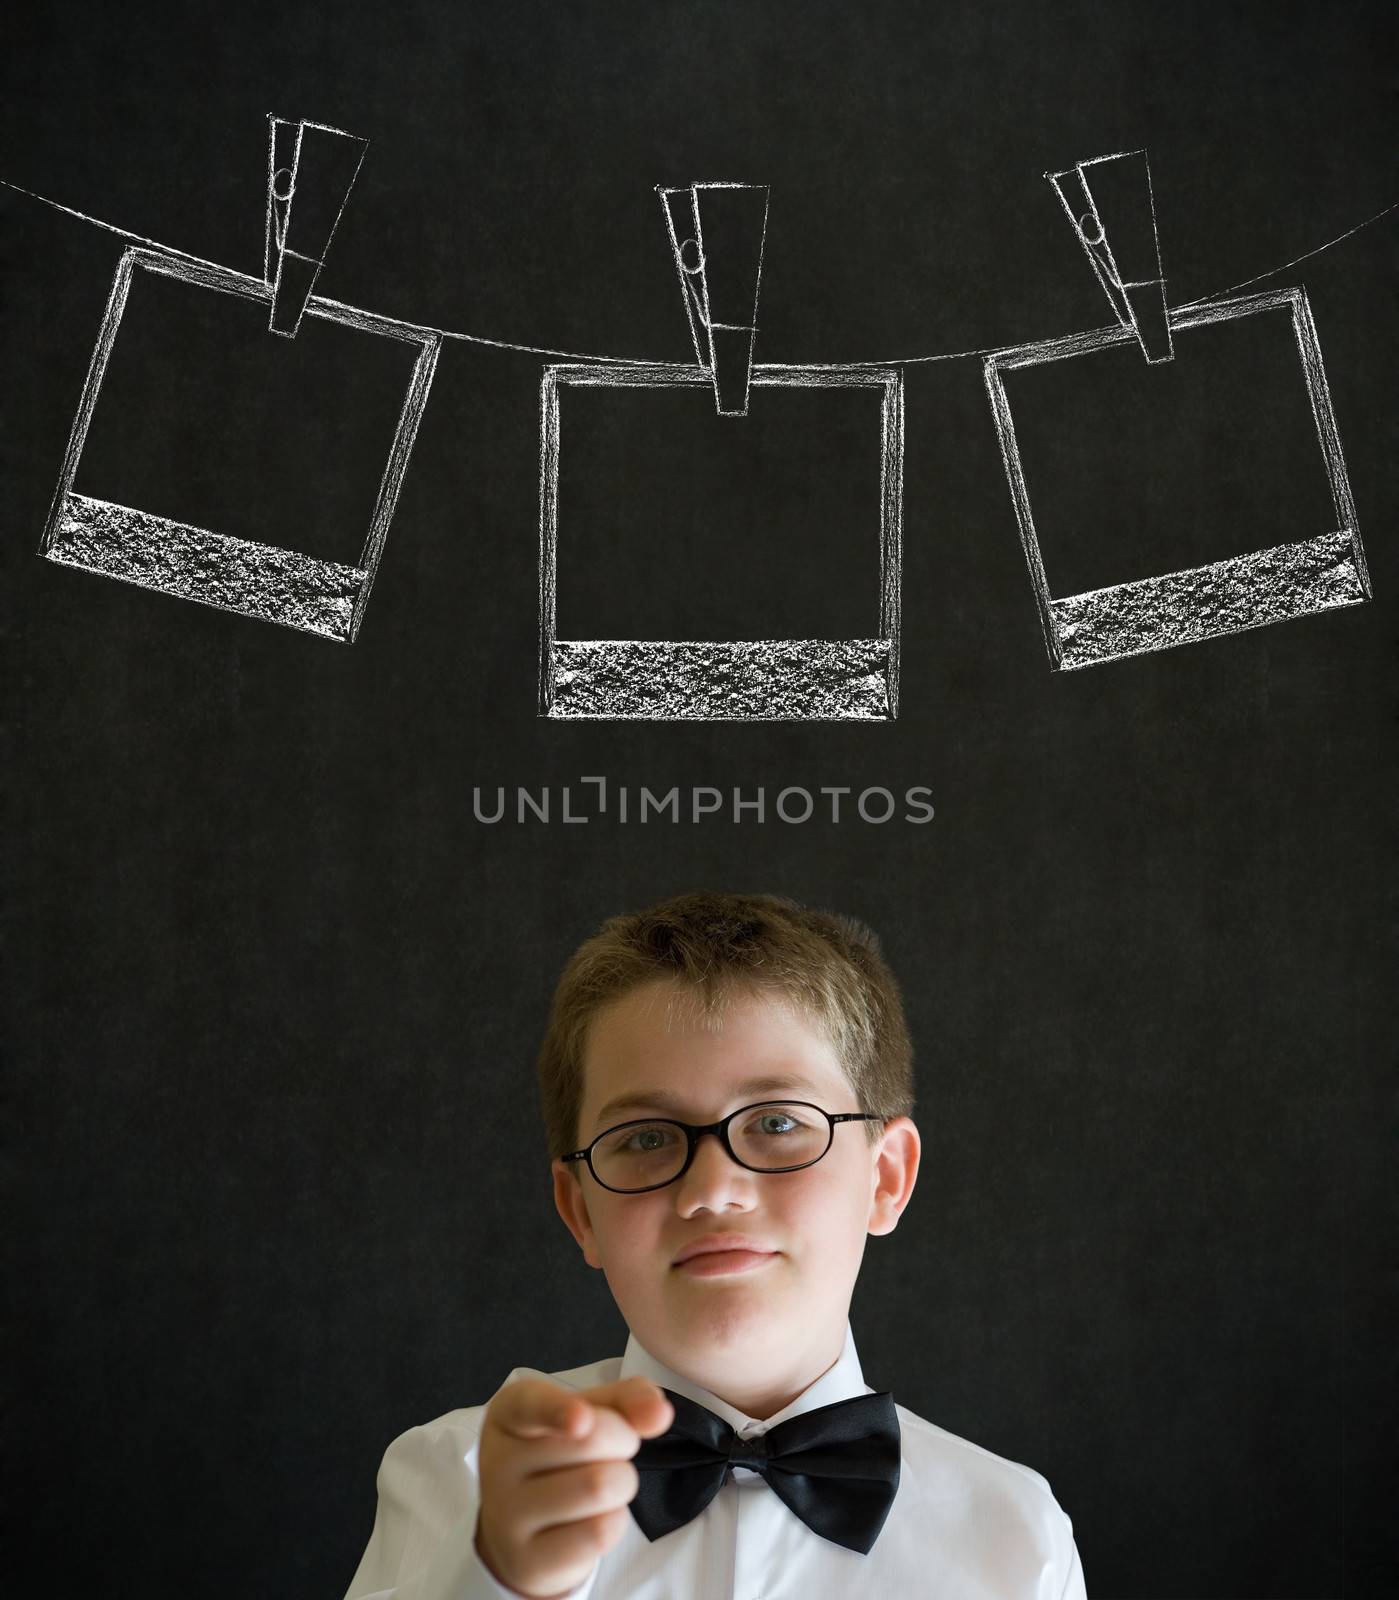 Thinking boy dressed up as business man with hanging instant photograph on blackboard background